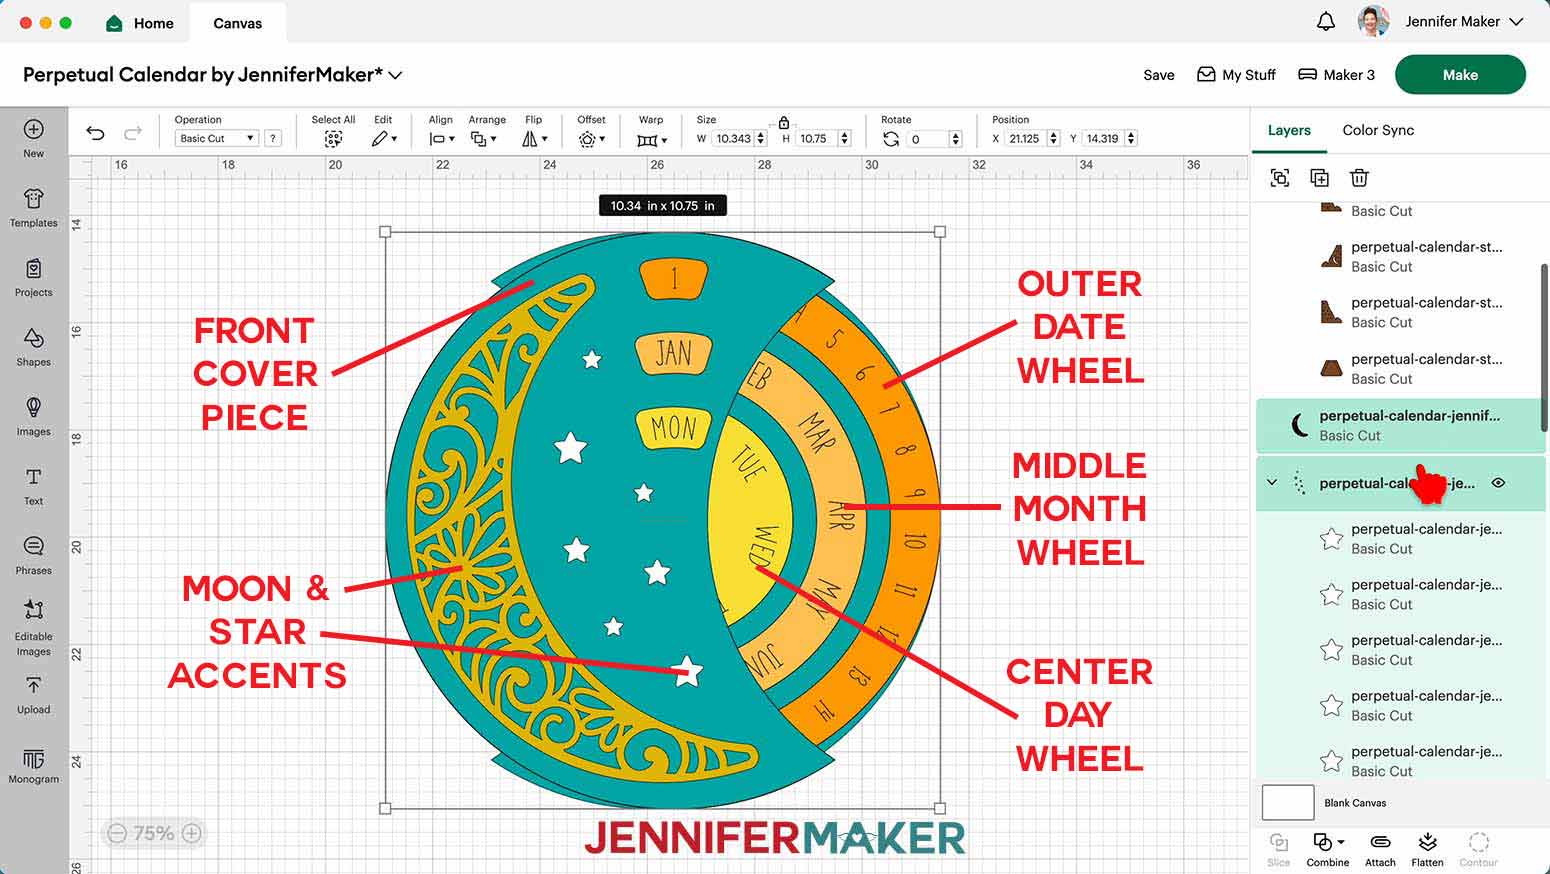 In Cricut Design Space, the accent pieces for the perpetual calendar are labeled in order from top left to bottom right: Front Cover Piece, Moon and Star Accents, Outer Date Wheel, Middle Month Wheel, and Center Day Wheel